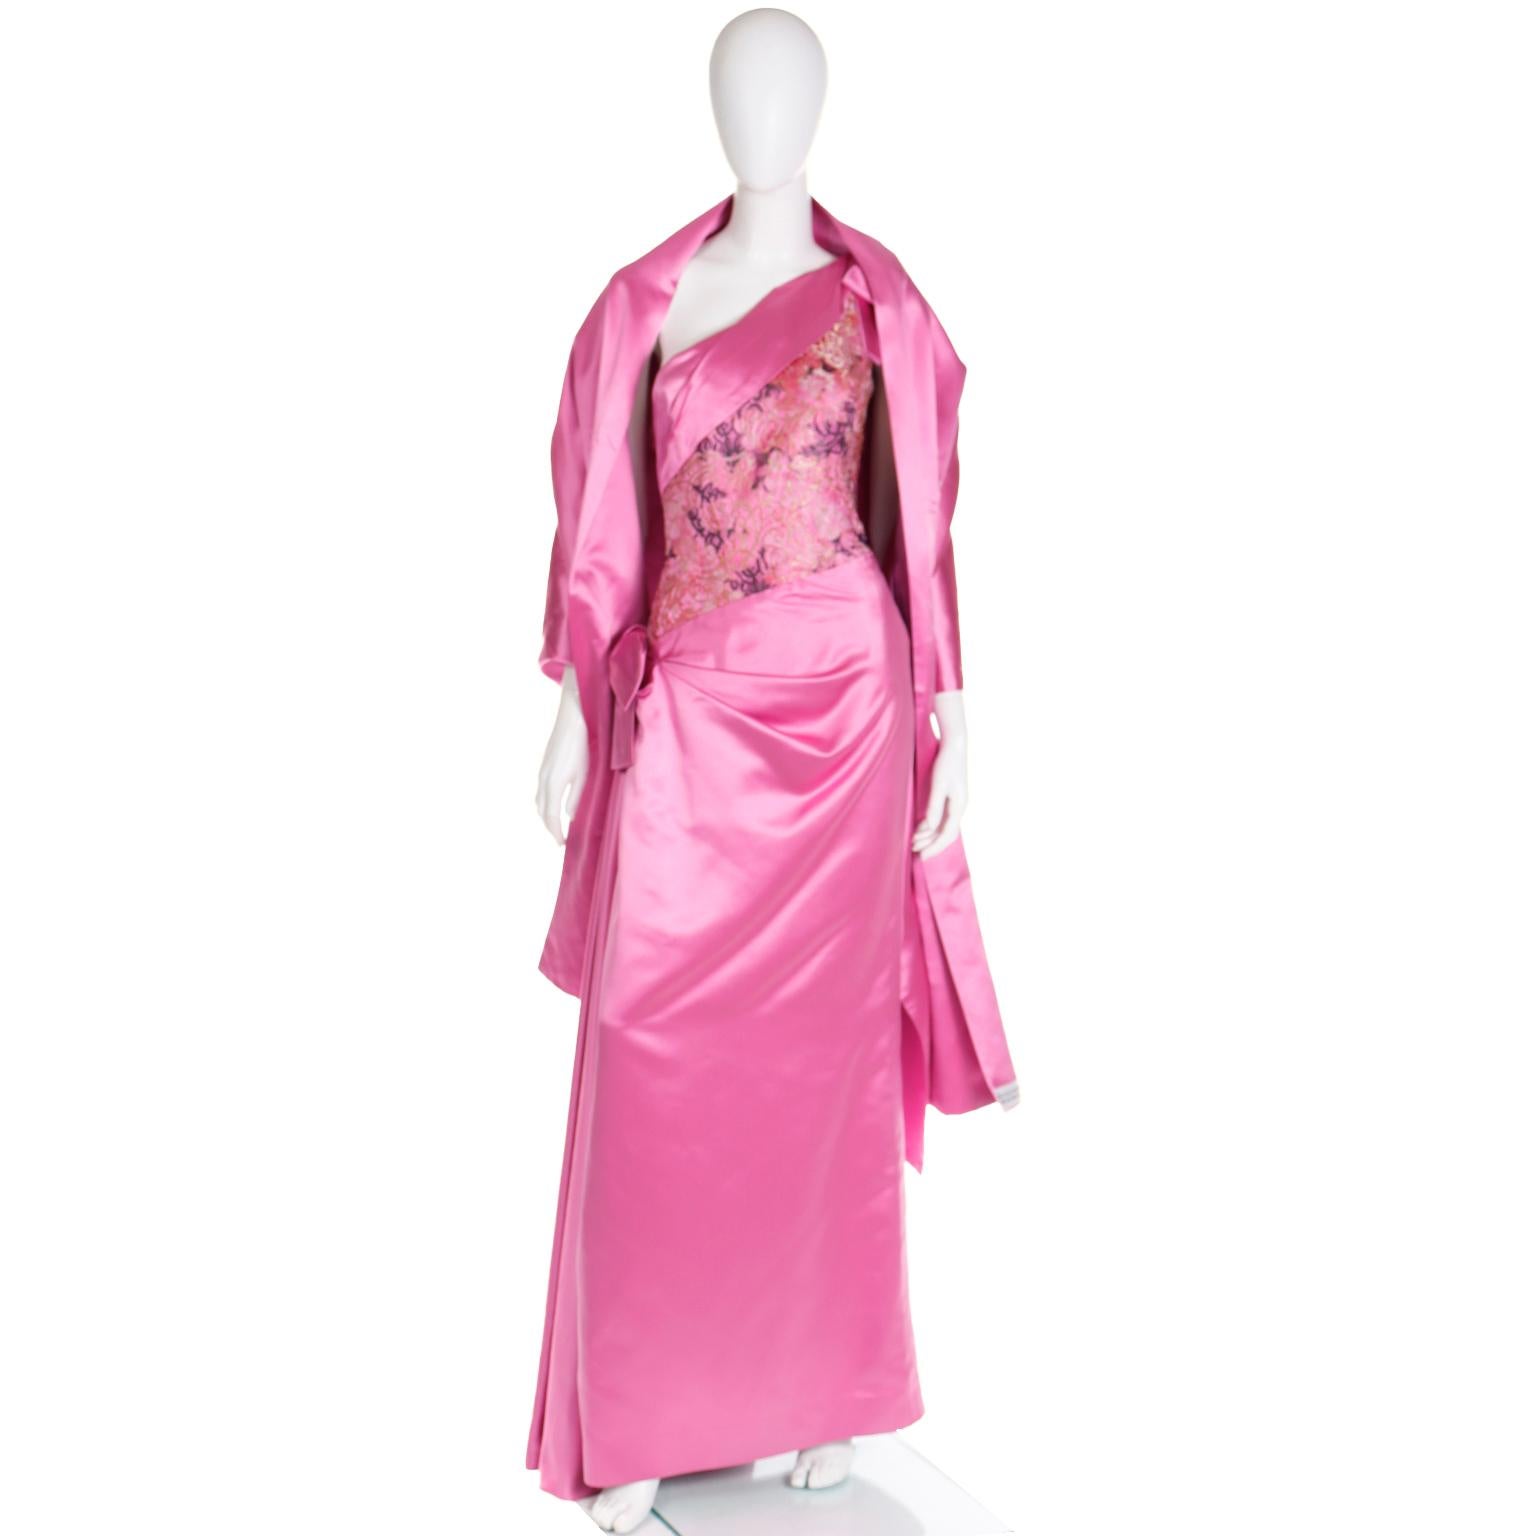 This is an elegant vintage 1990's pink satin evening gown with a matching pink satin wrap for chilly nights. This gorgeous one shoulder dress is beautifully draped and features gorgeous floral mesh lace on the bodice. The draping at the hip is